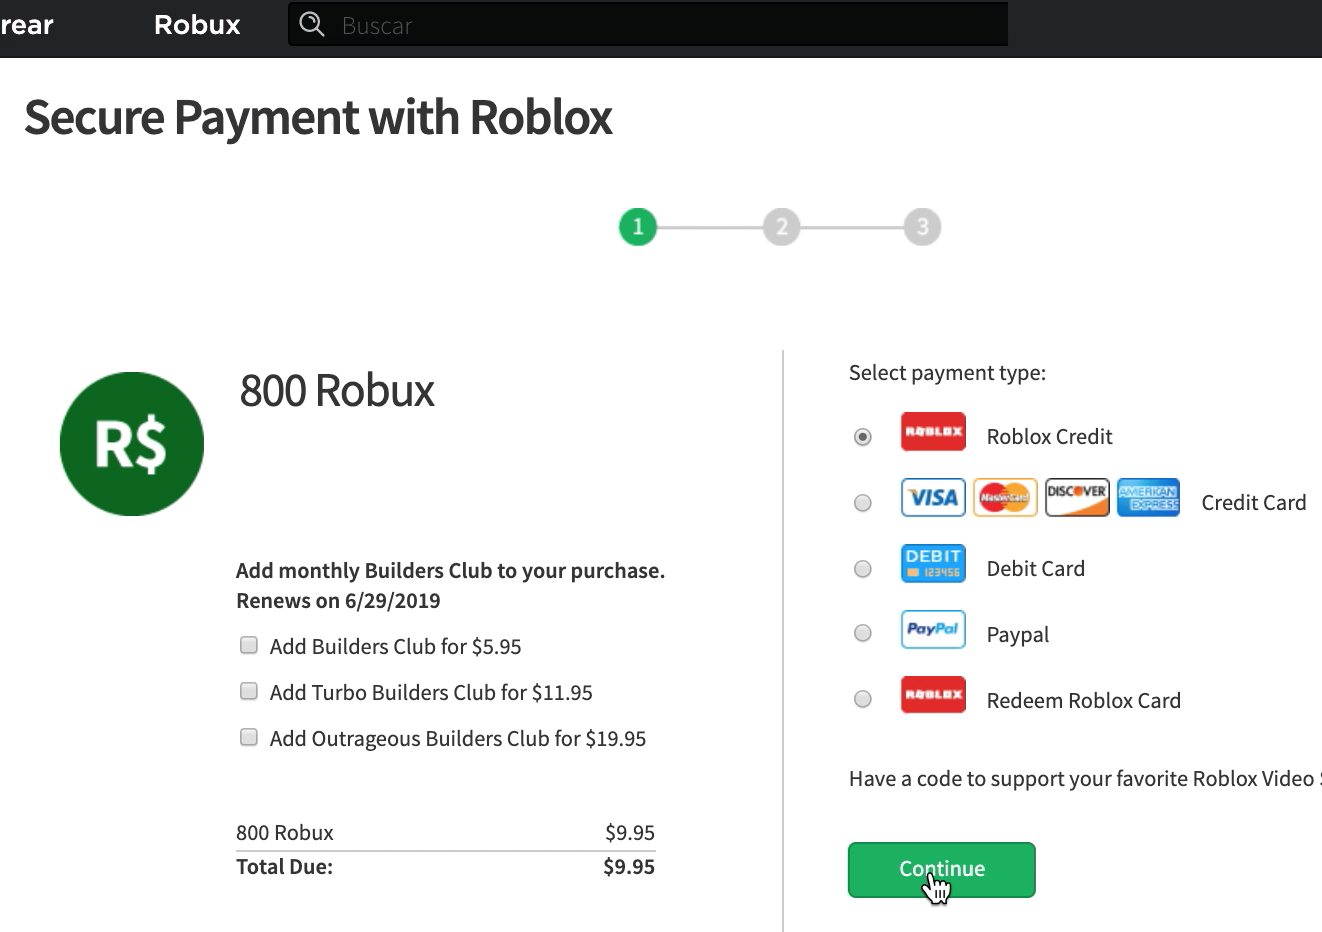 Pin Roblox Card How To Get Free Robux Codes 2019 February - kat roblox script robux gratis robux